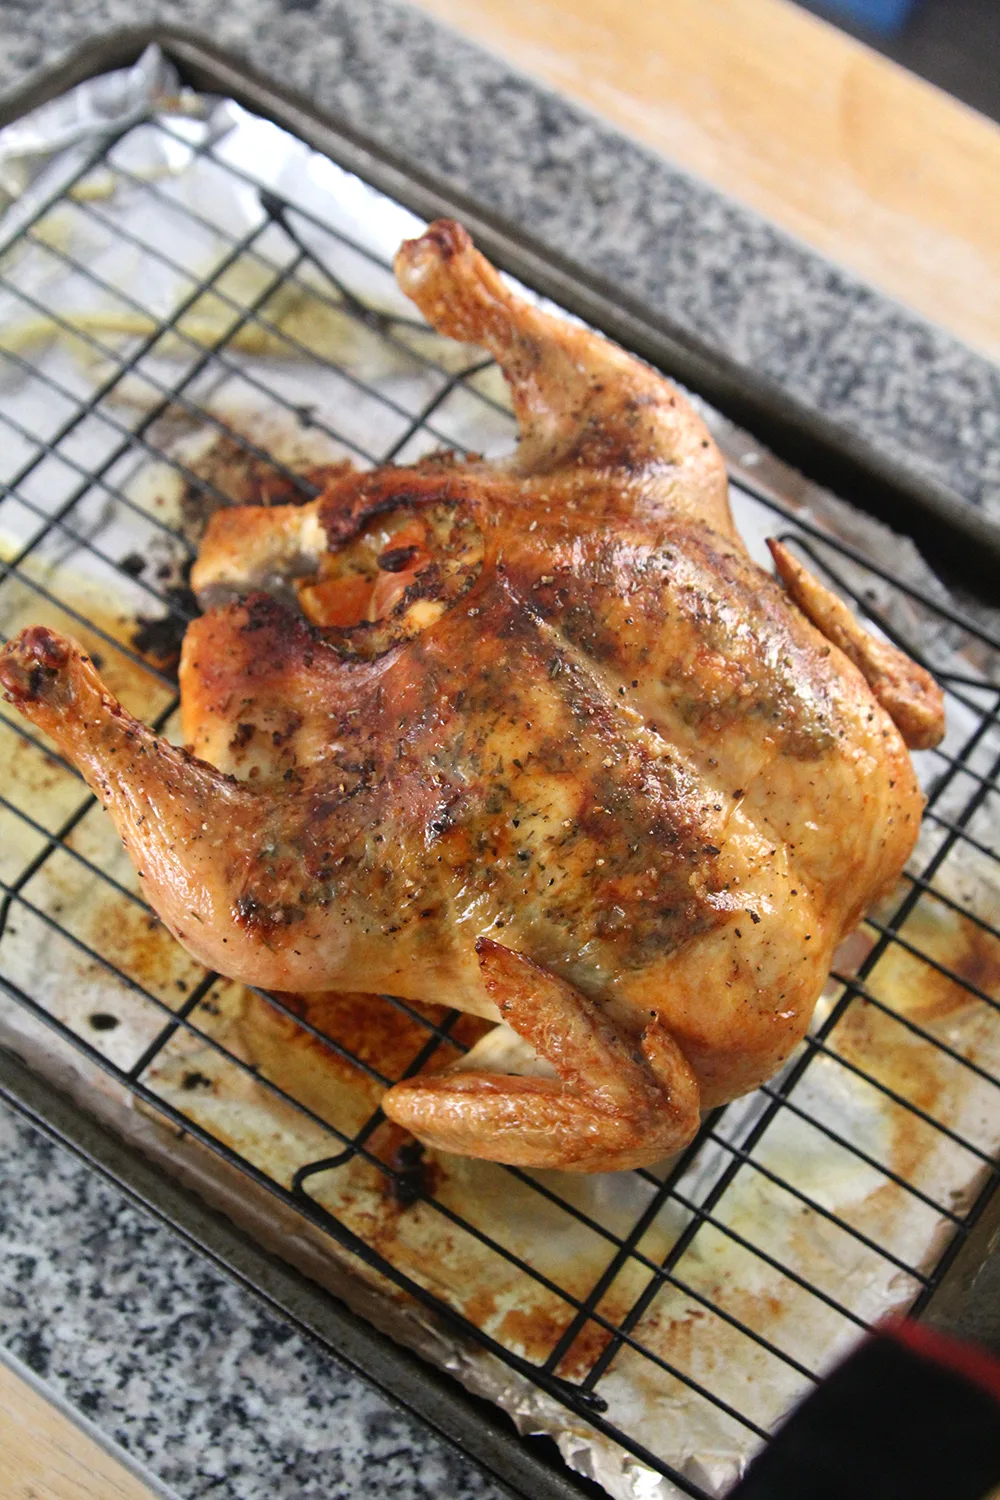 A juicy roasted chicken sits on a black rack on top of a foil-lined baking sheet. It's browned and you can see the seasonings through the skin.